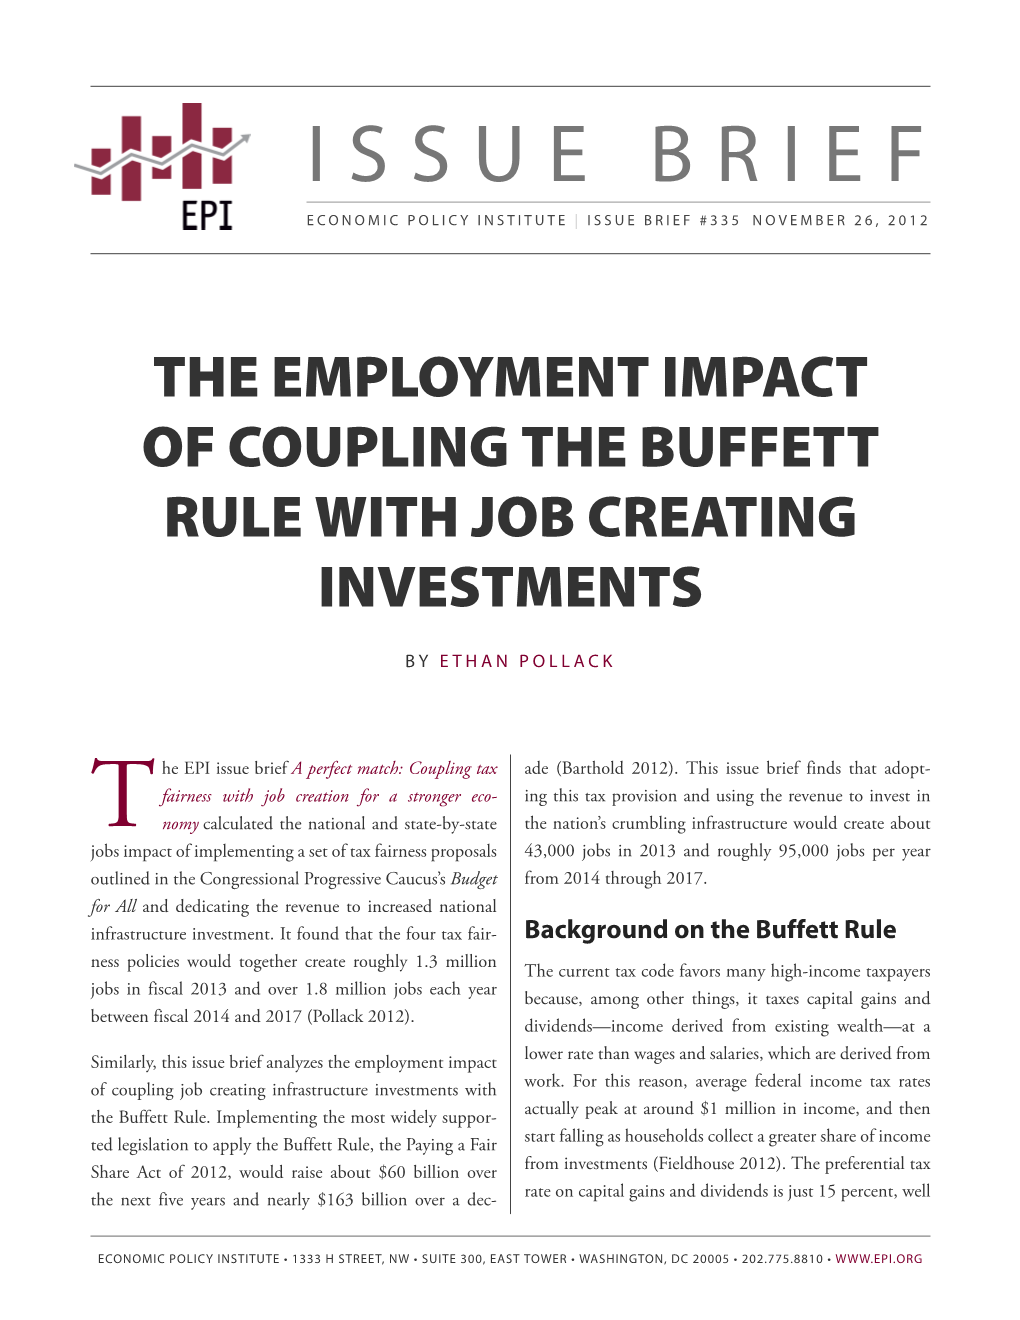 The Employment Impact of Coupling the Buffett Rule with Job Creating Investments